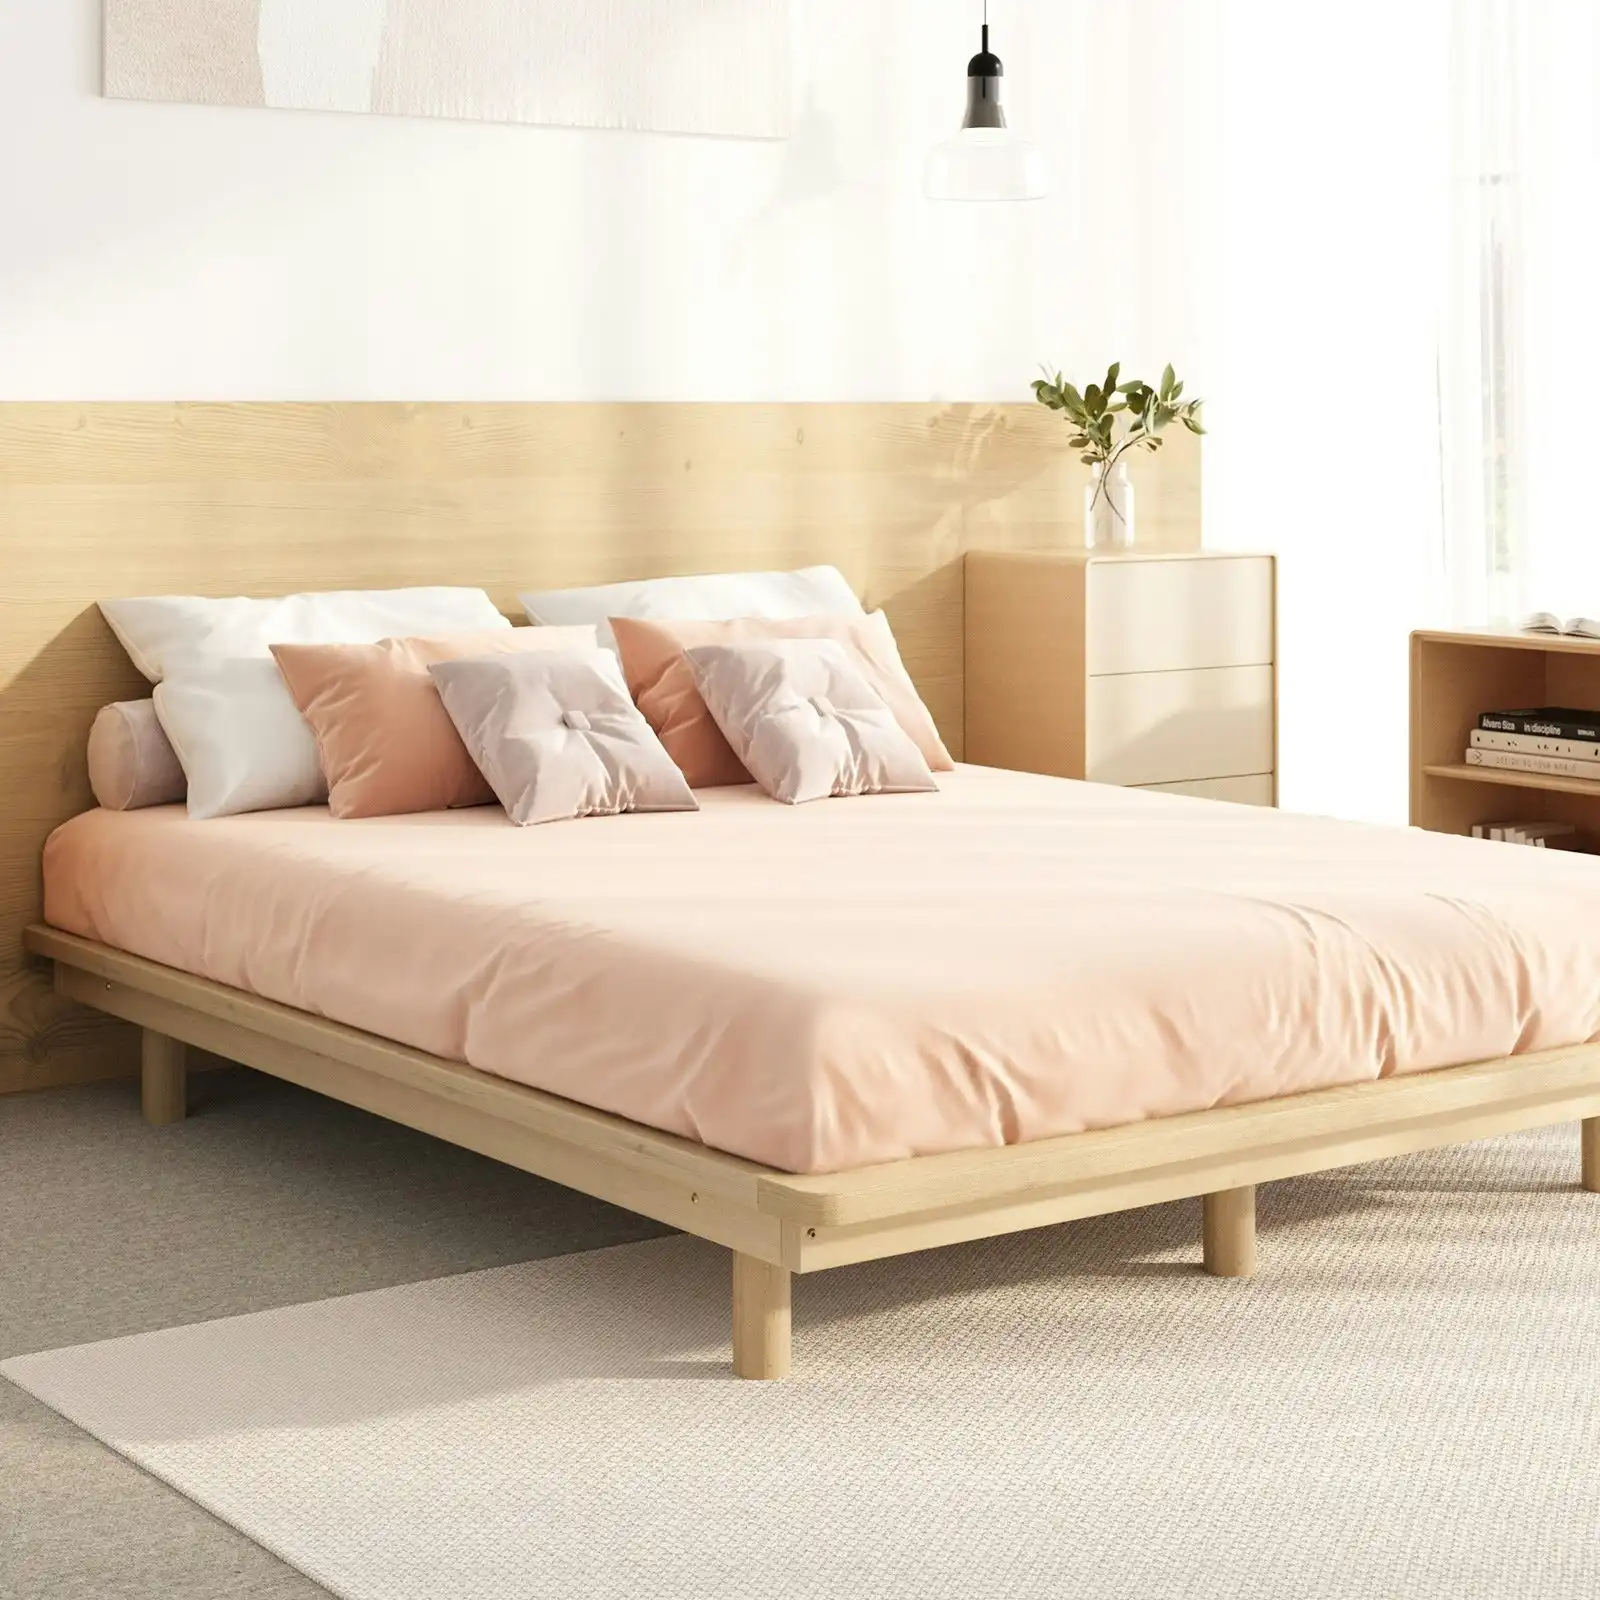 Oikiture Bed Frame King Size Wooden Bed Base Floating